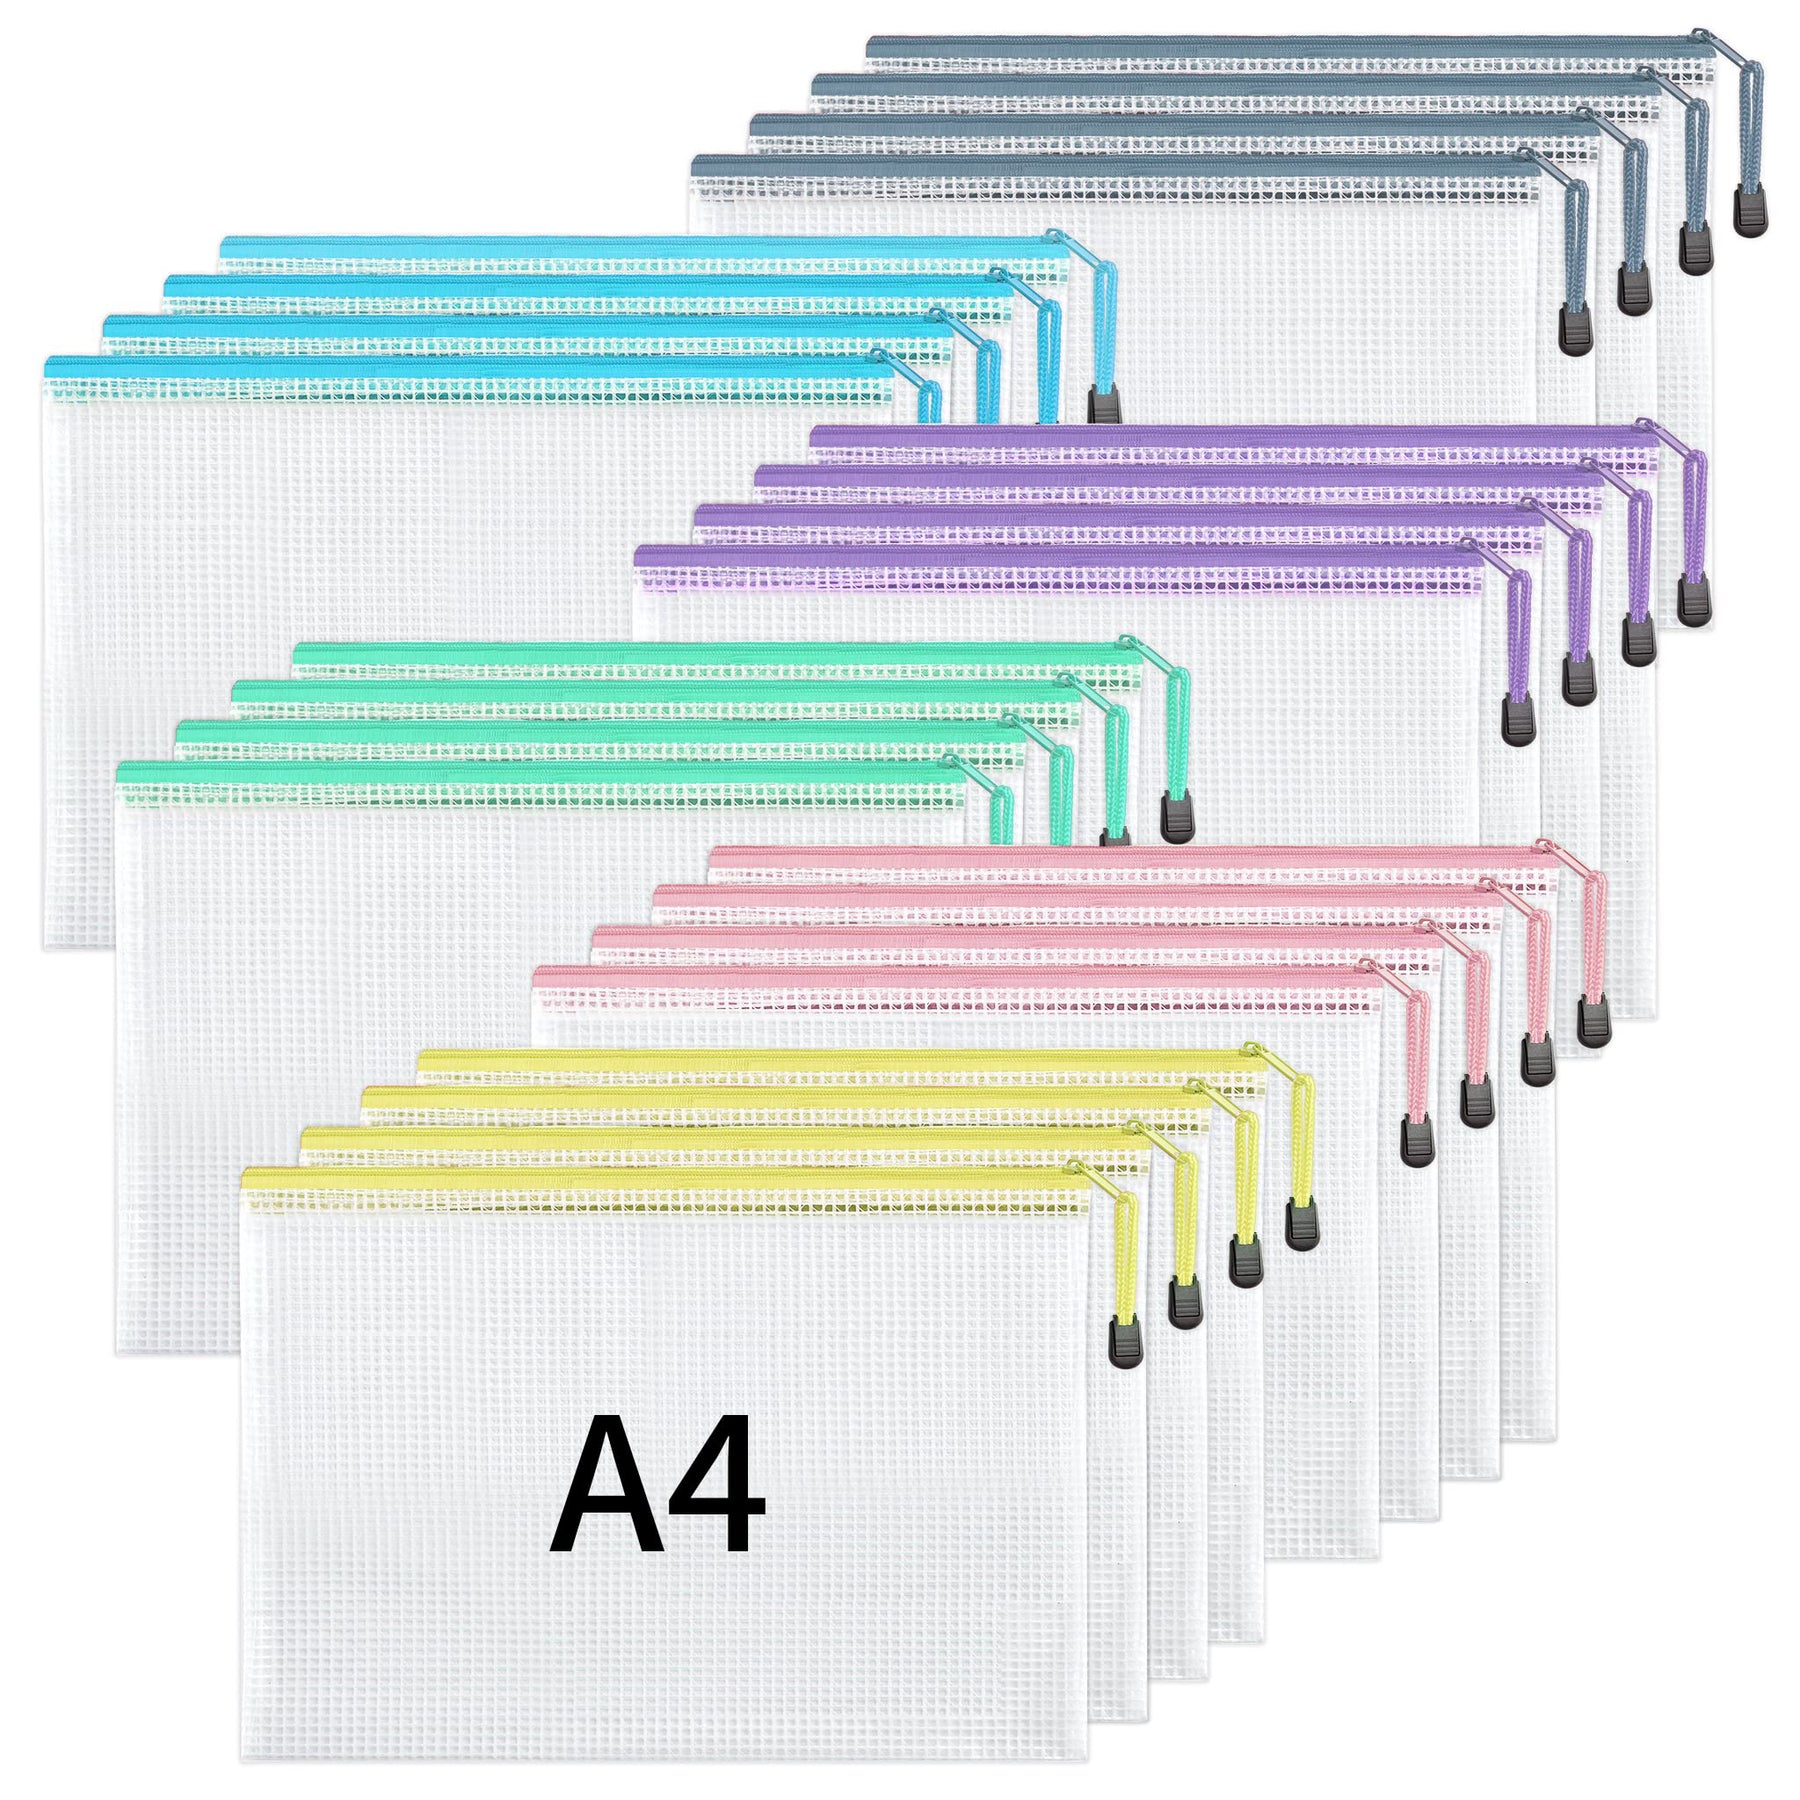 28pcs Mesh Zipper Pouch Document Bag, Bags for Organizing, Waterproof Zip  File Bags, Letter Size, A4 7Colors Puzzle Storage Office Supplies, Folder  Translucent Wallet Holders for School/Homework - Yahoo Shopping